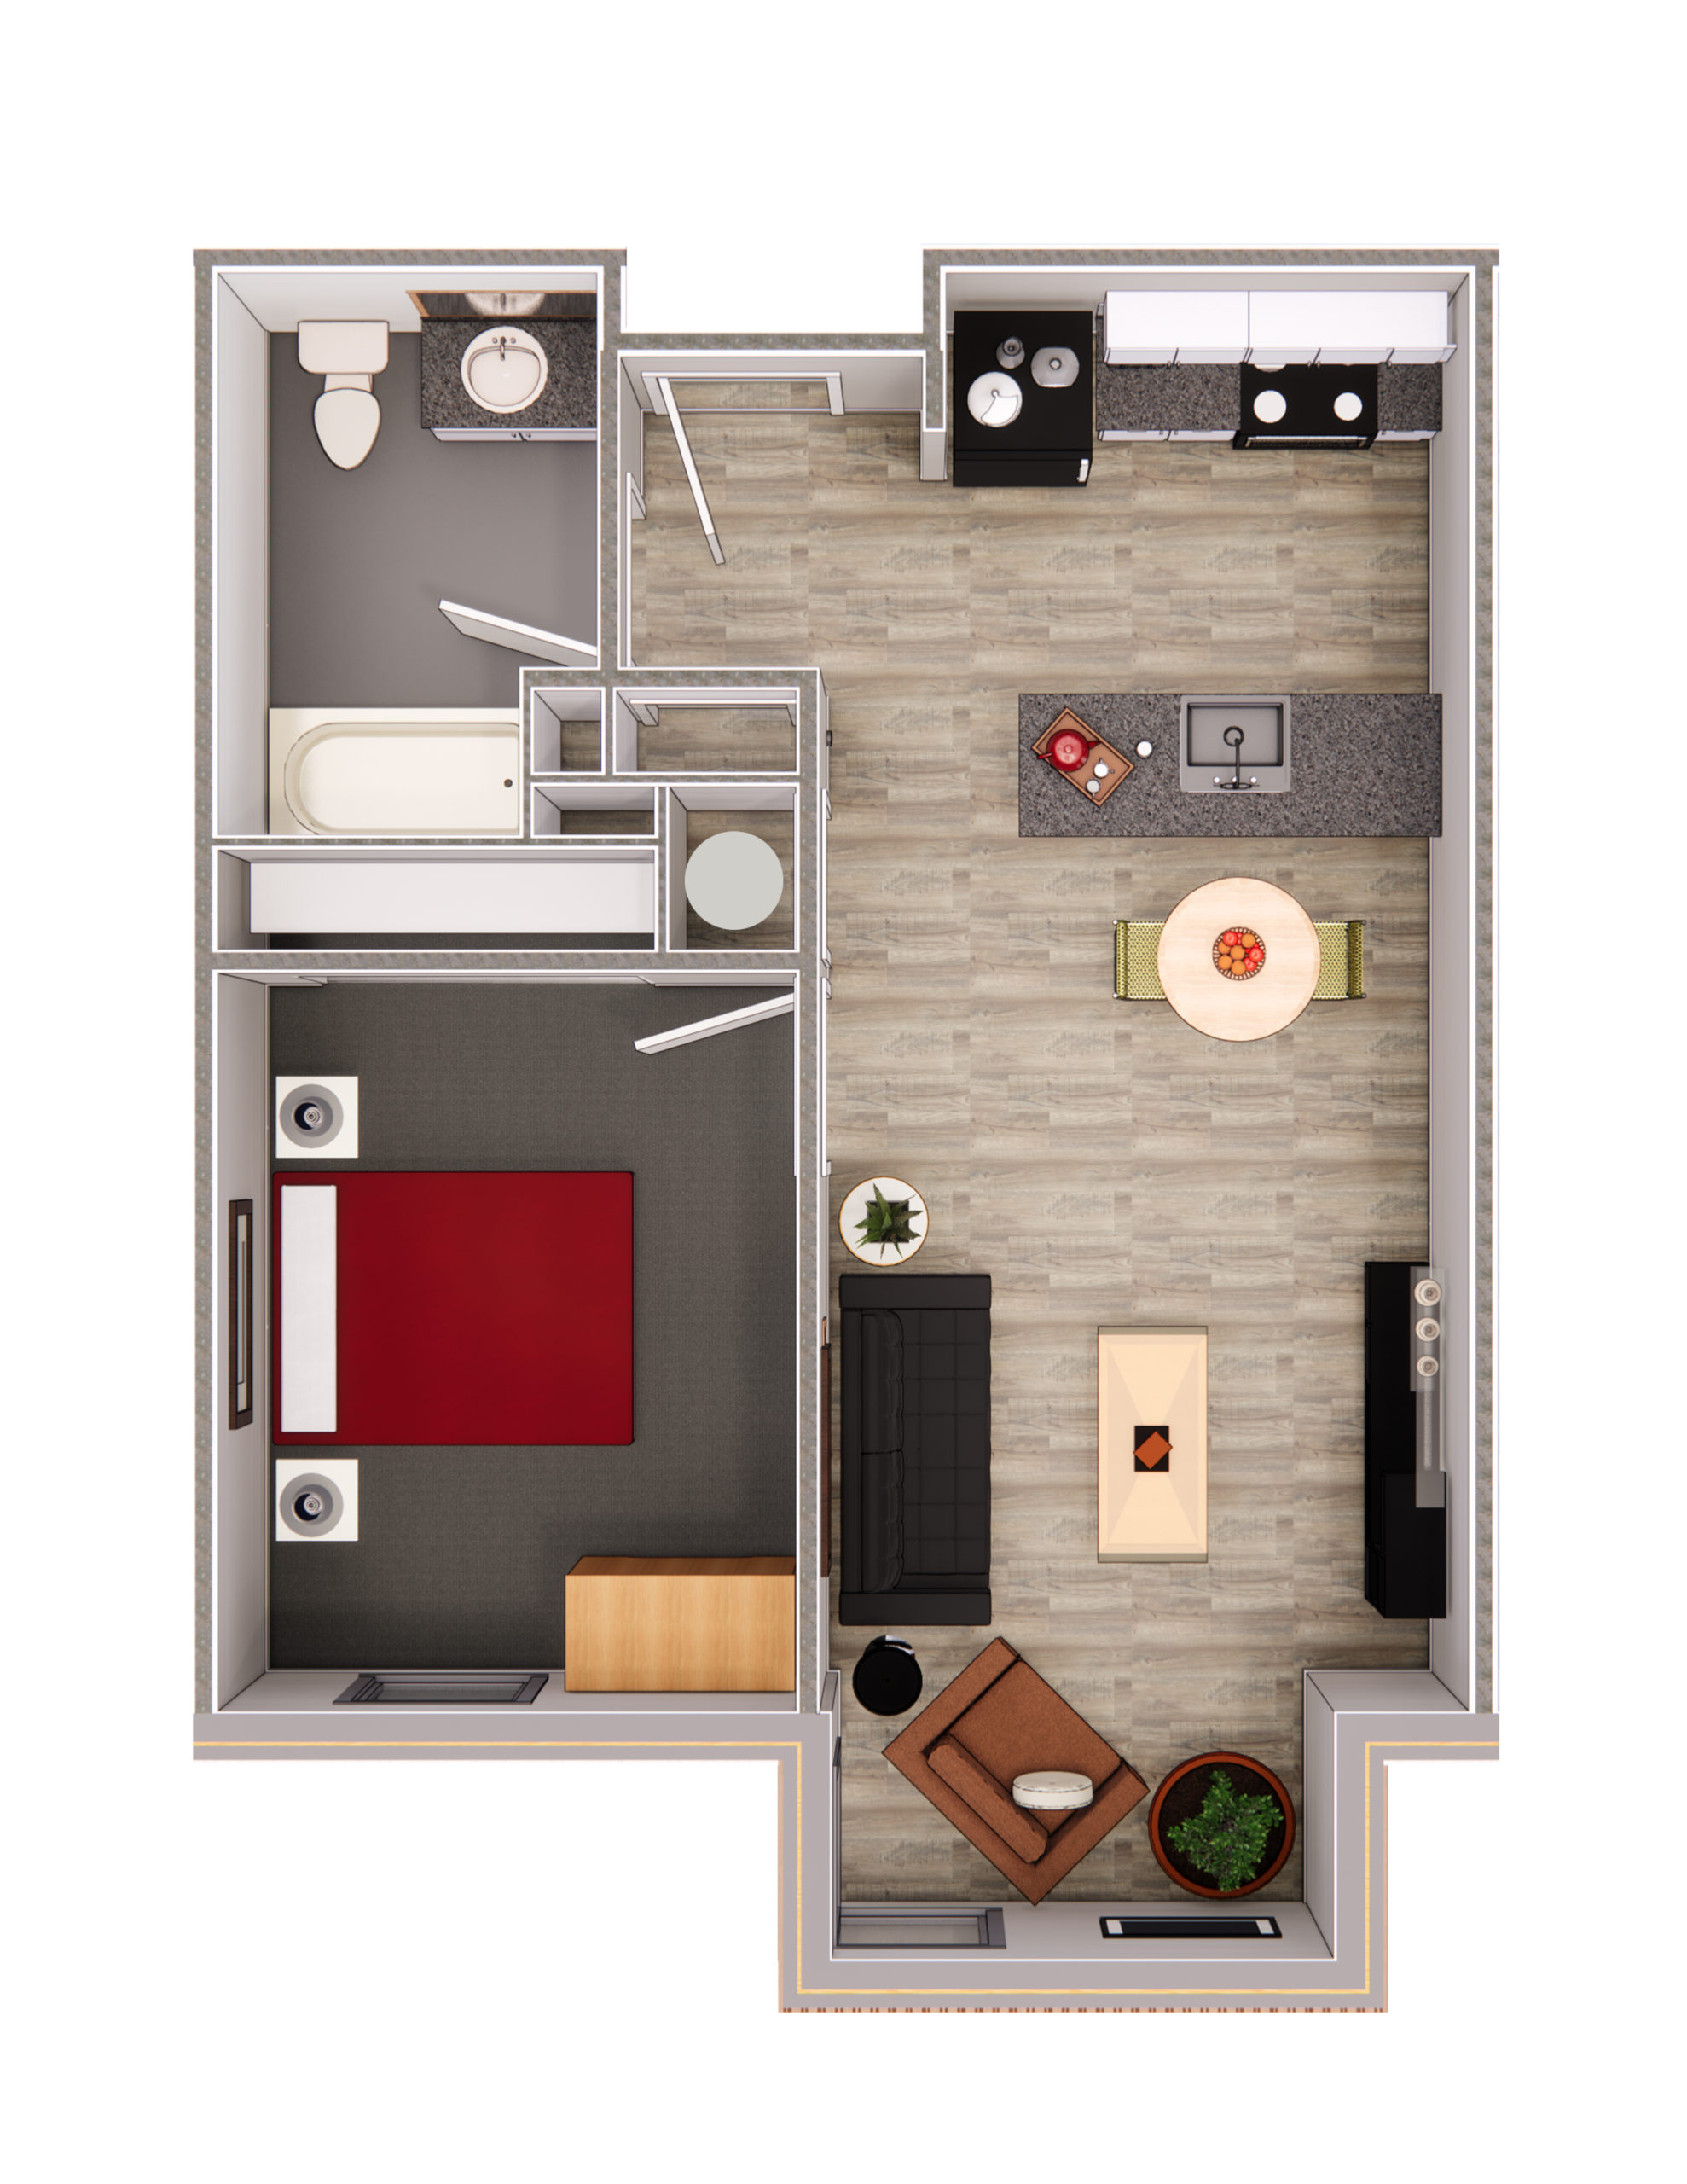 One-bedroom layout